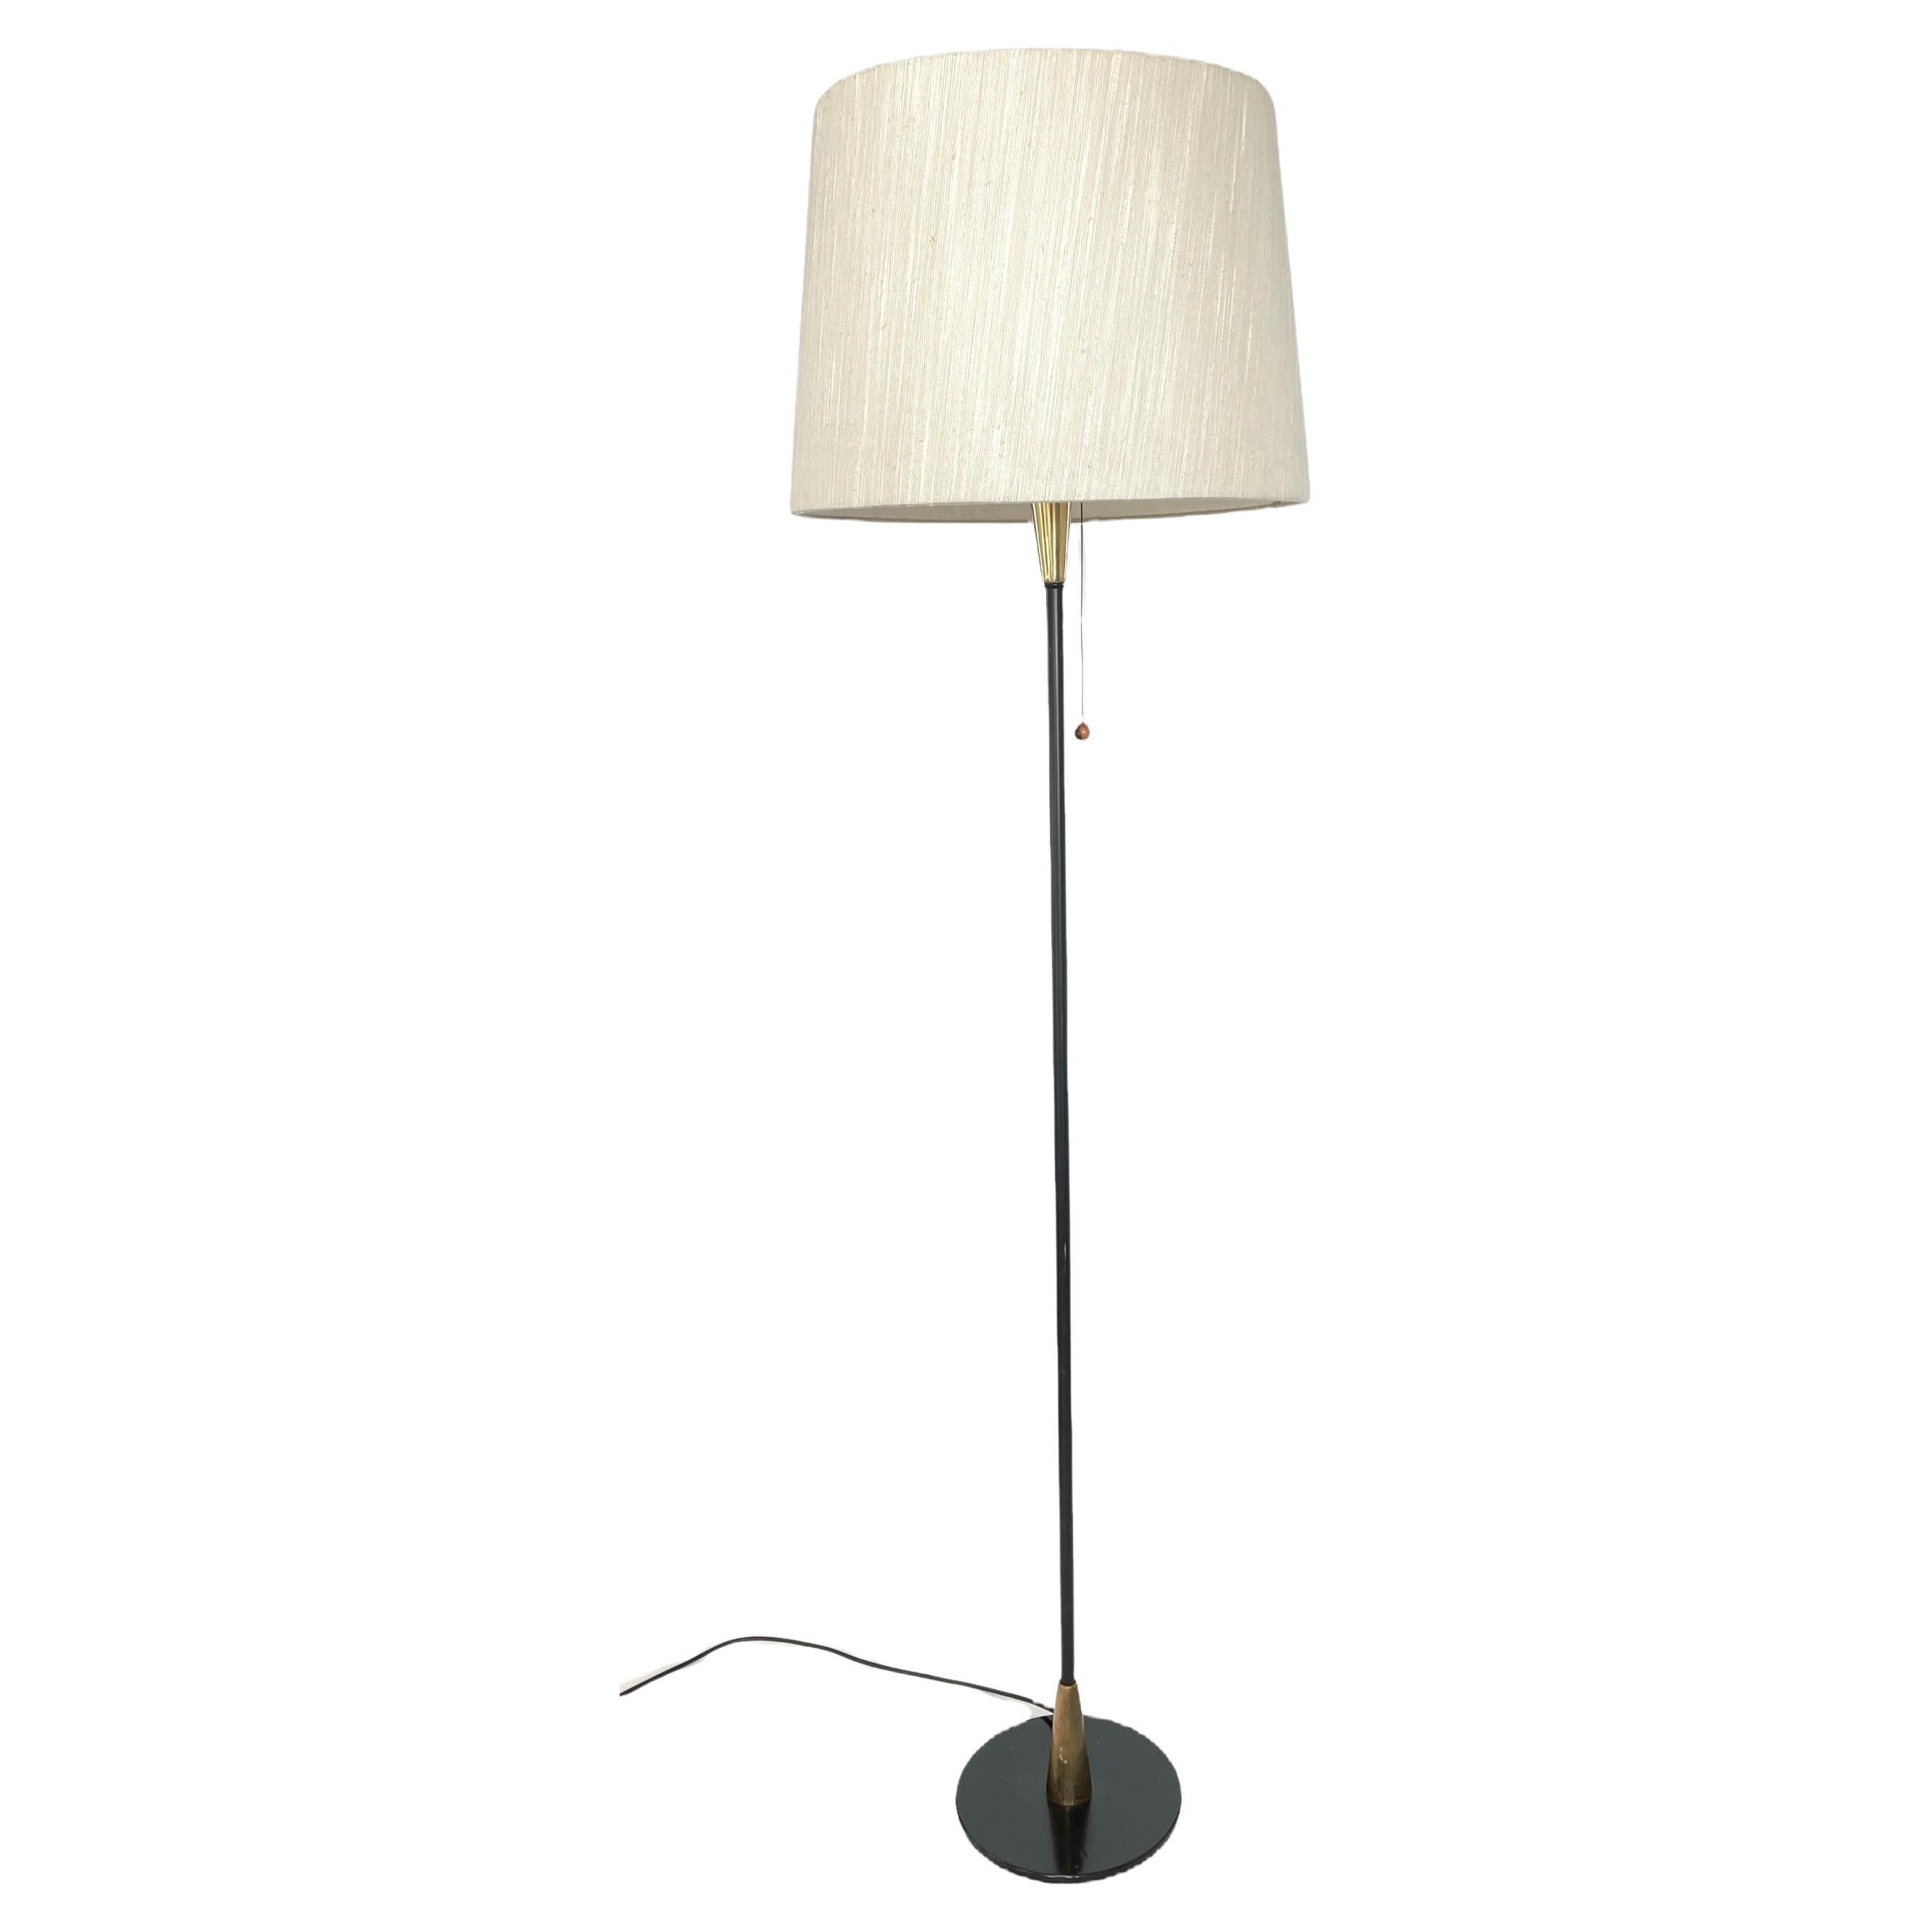 Mid-century Modern Floor Lamp by Maria Lindeman for Idman, Finland, 1950s For Sale